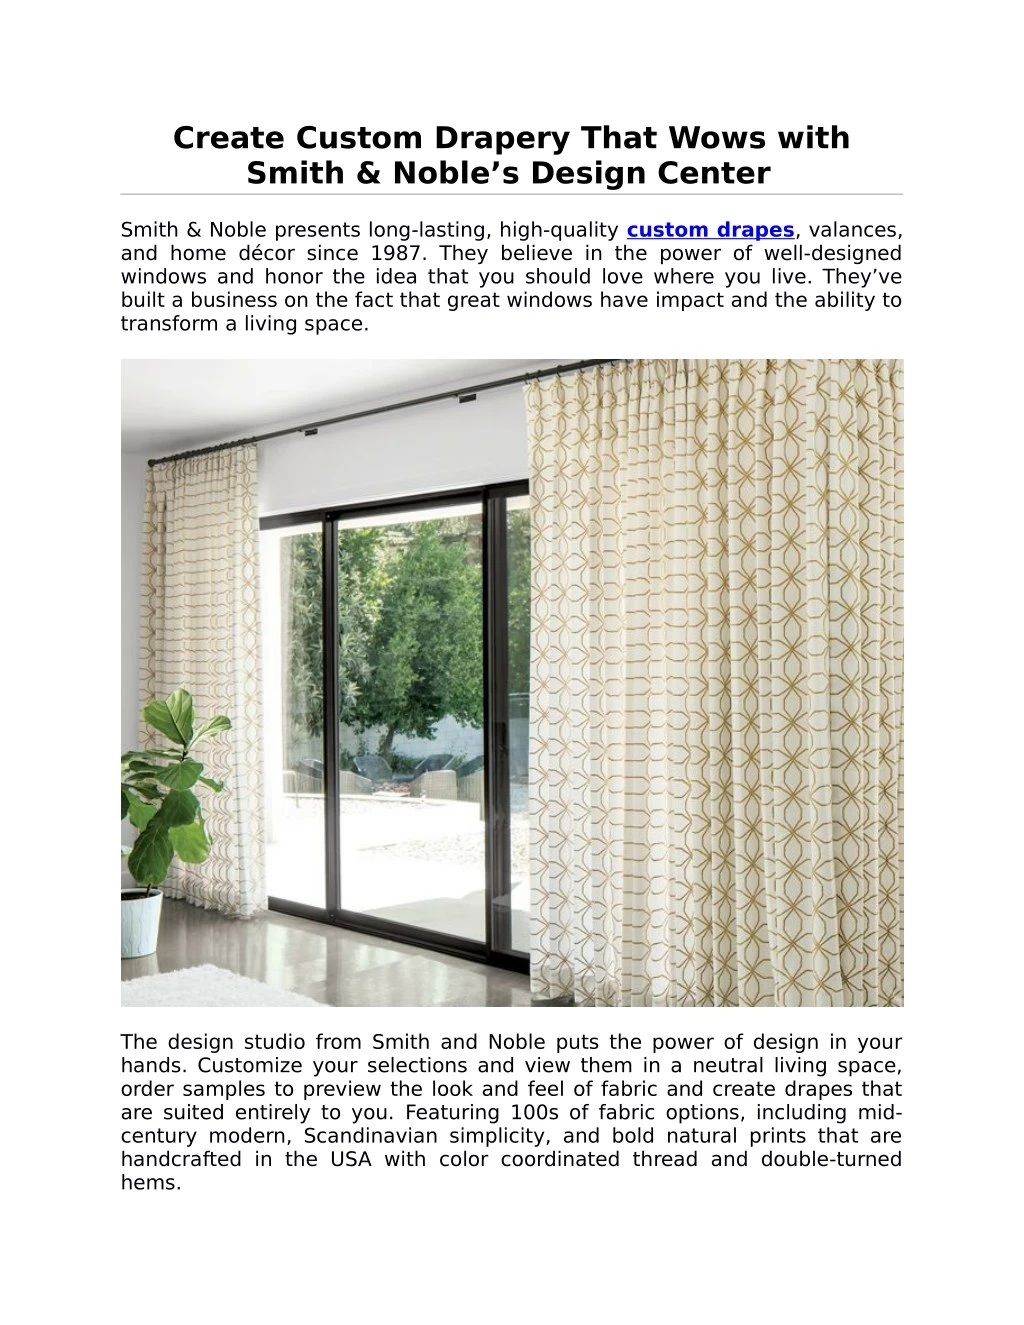 create custom drapery that wows with smith noble